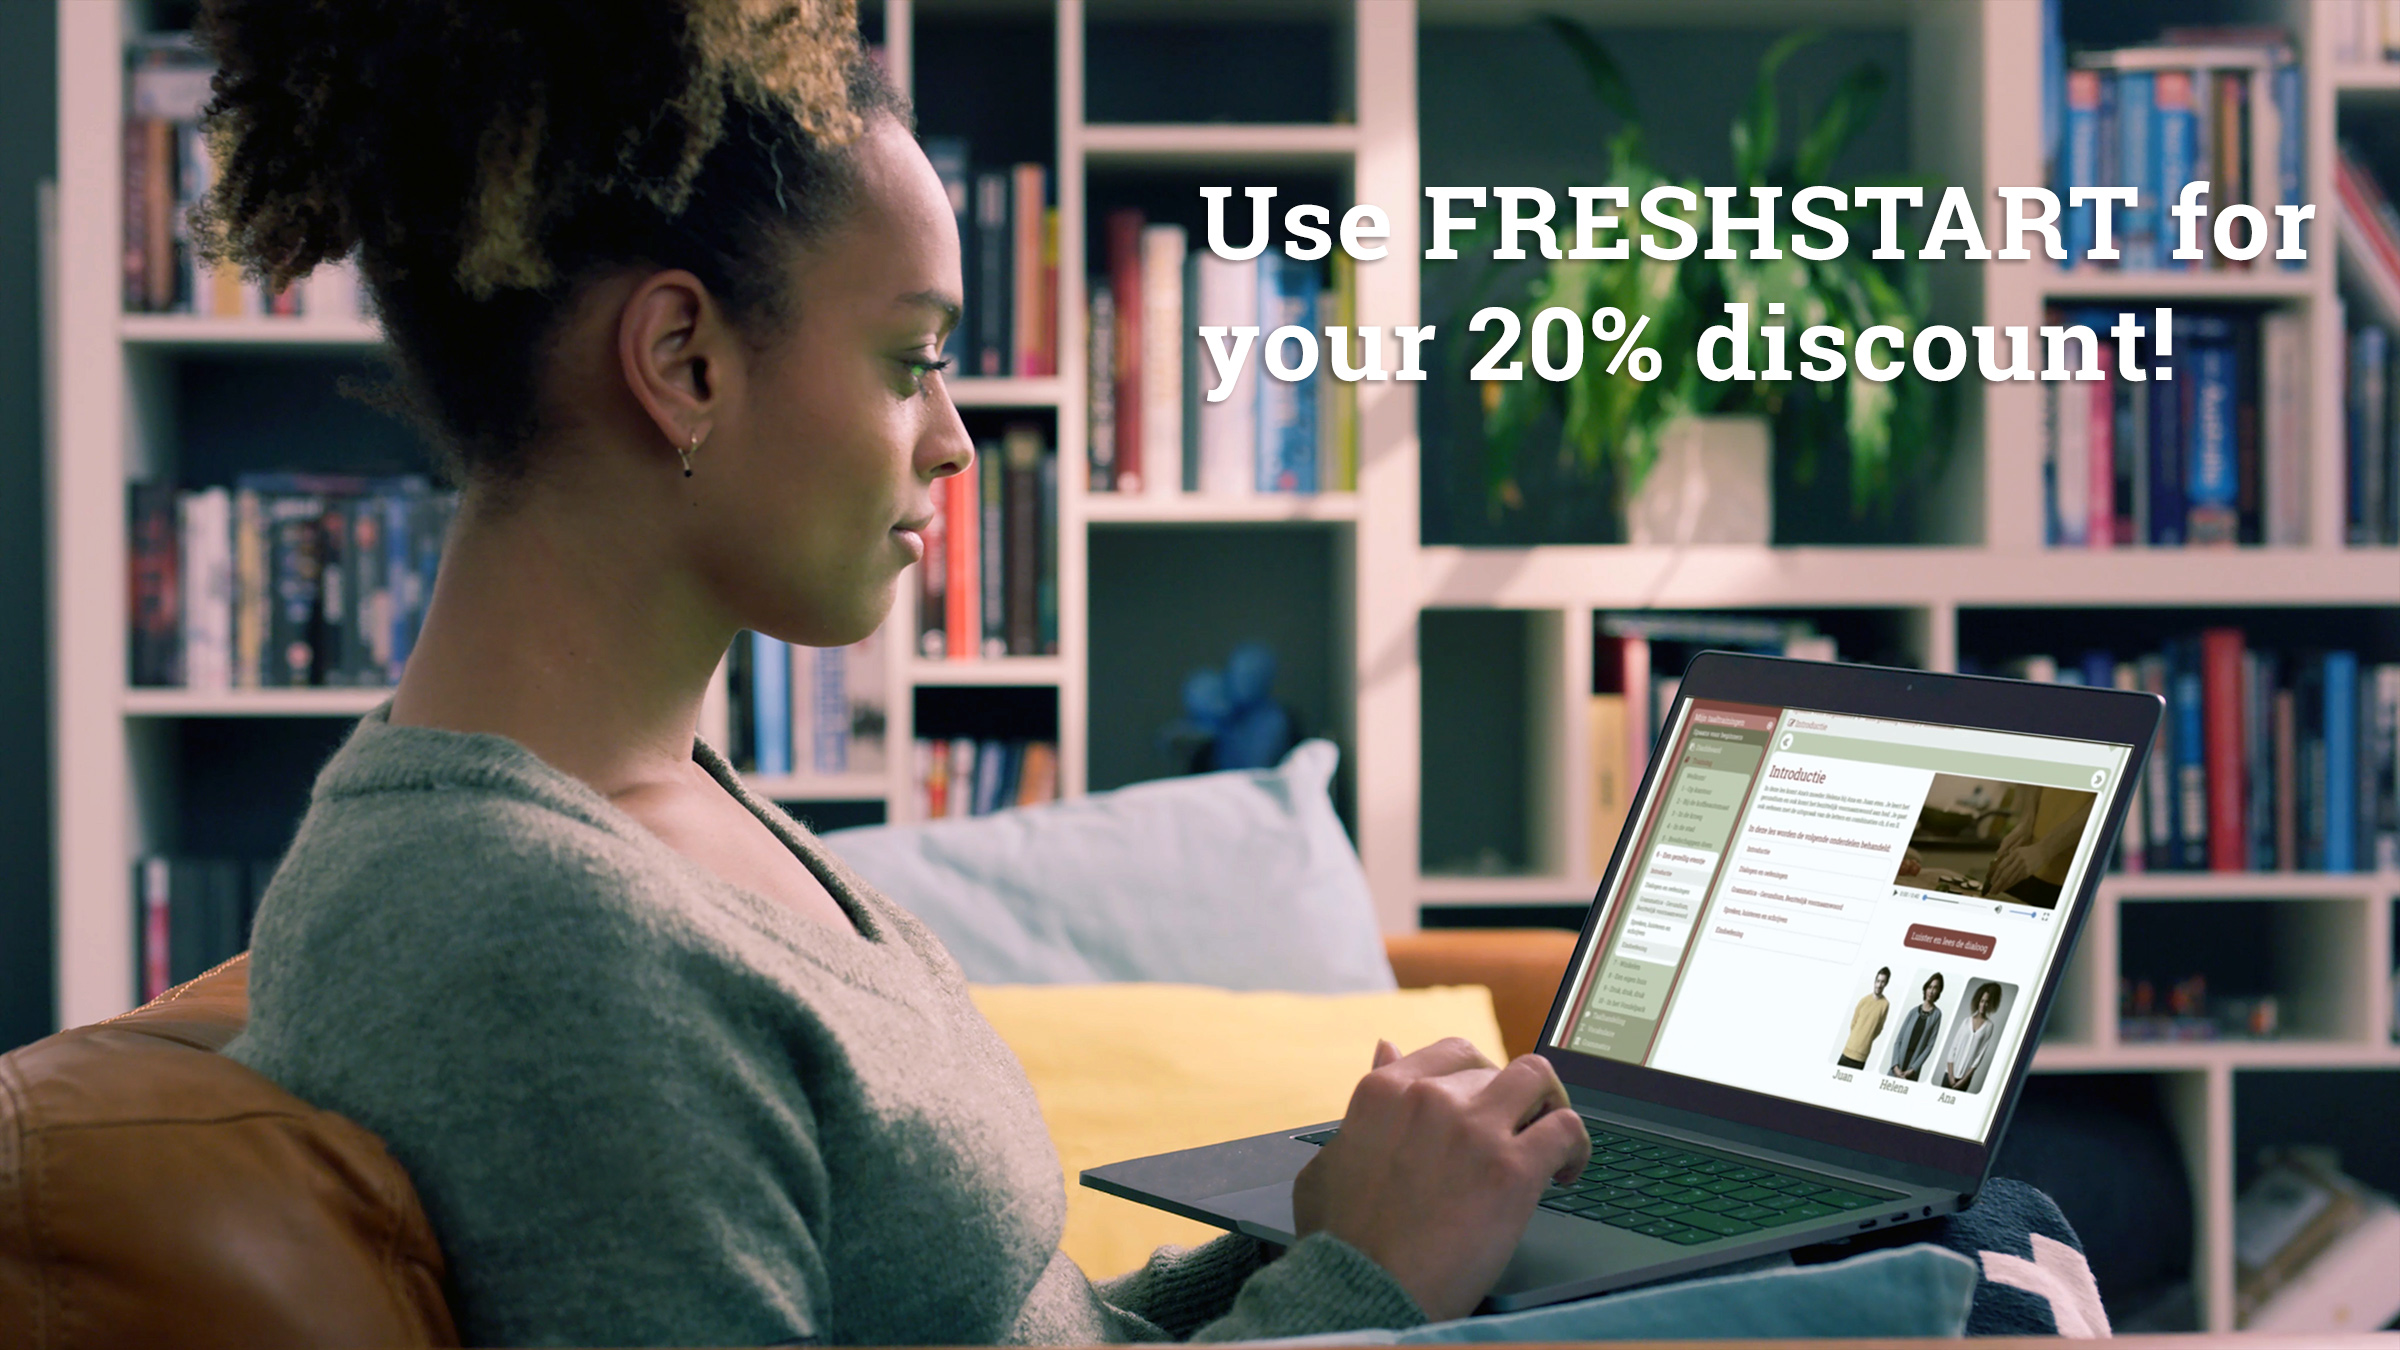 Use FRESHSTART for your 20% discount